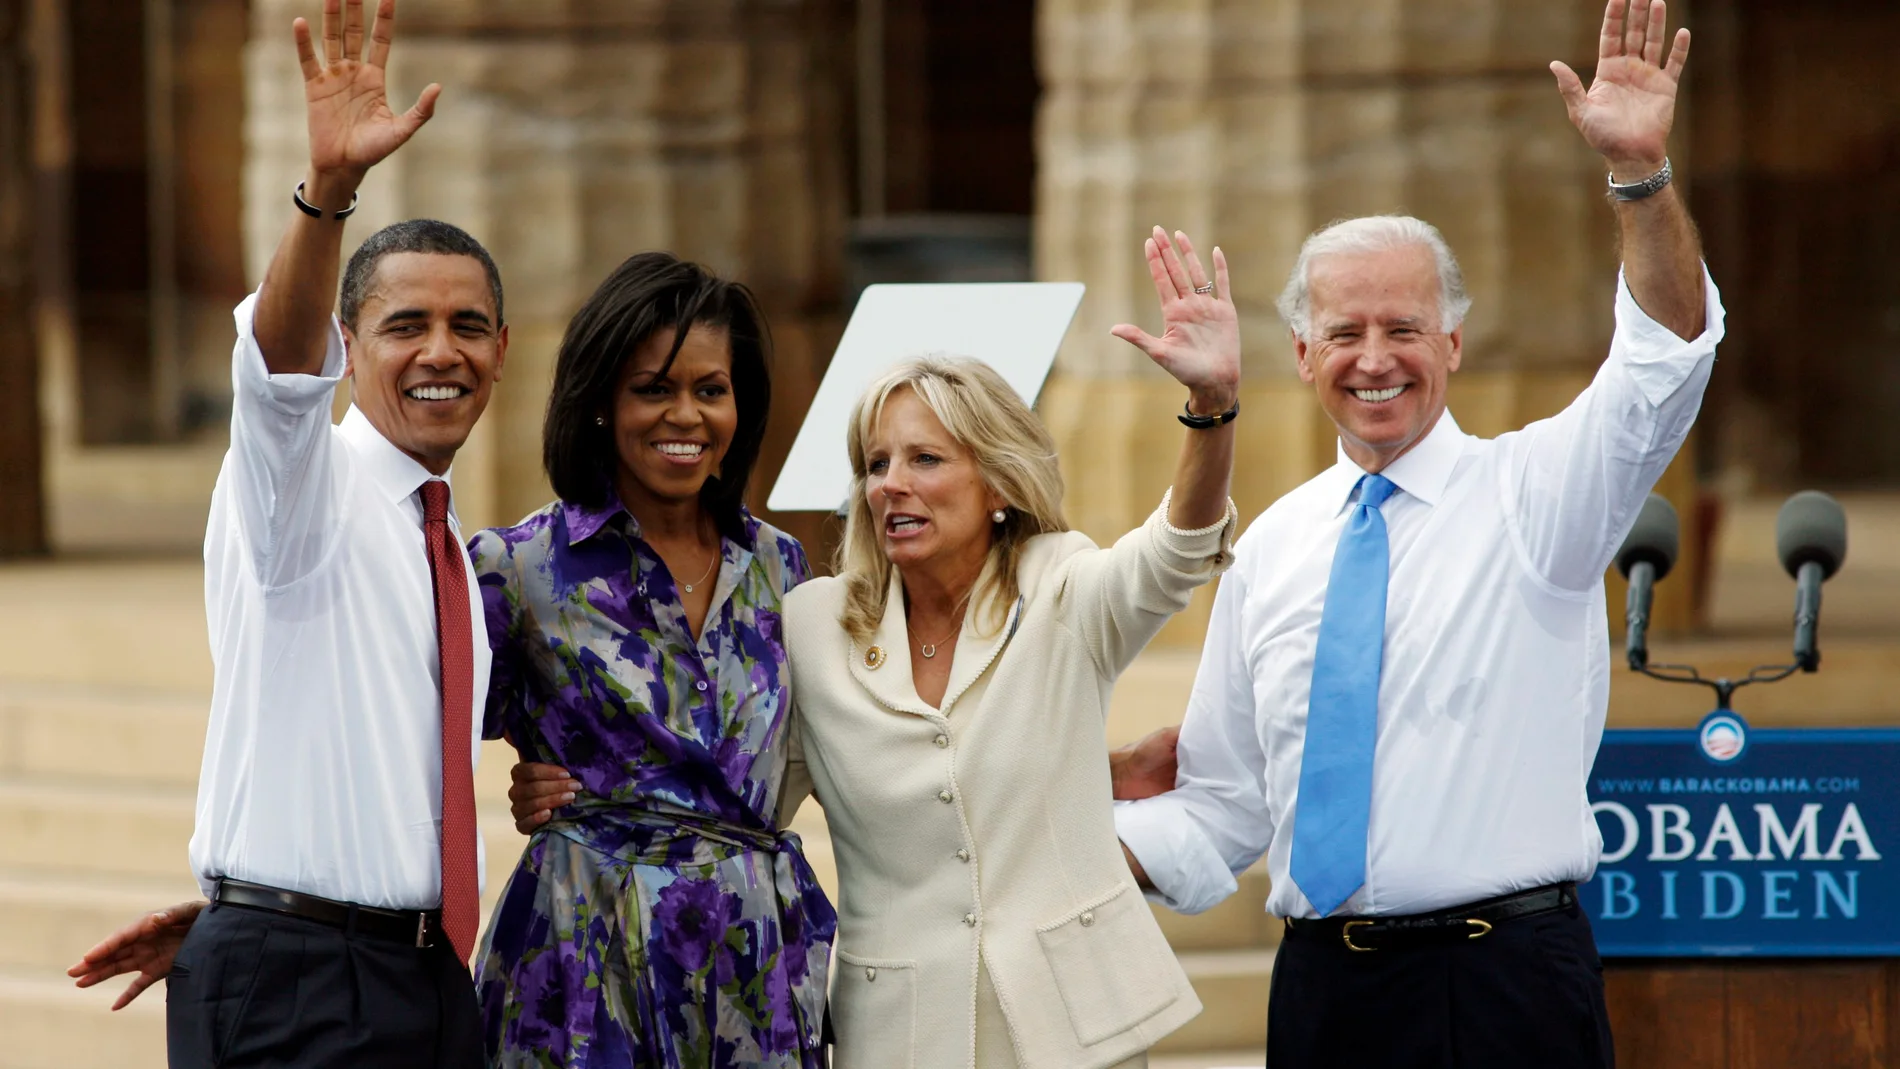 Barack Obama and vice presidential running mate Senator Joe Biden appear together with their wives at campaign event in Springfield